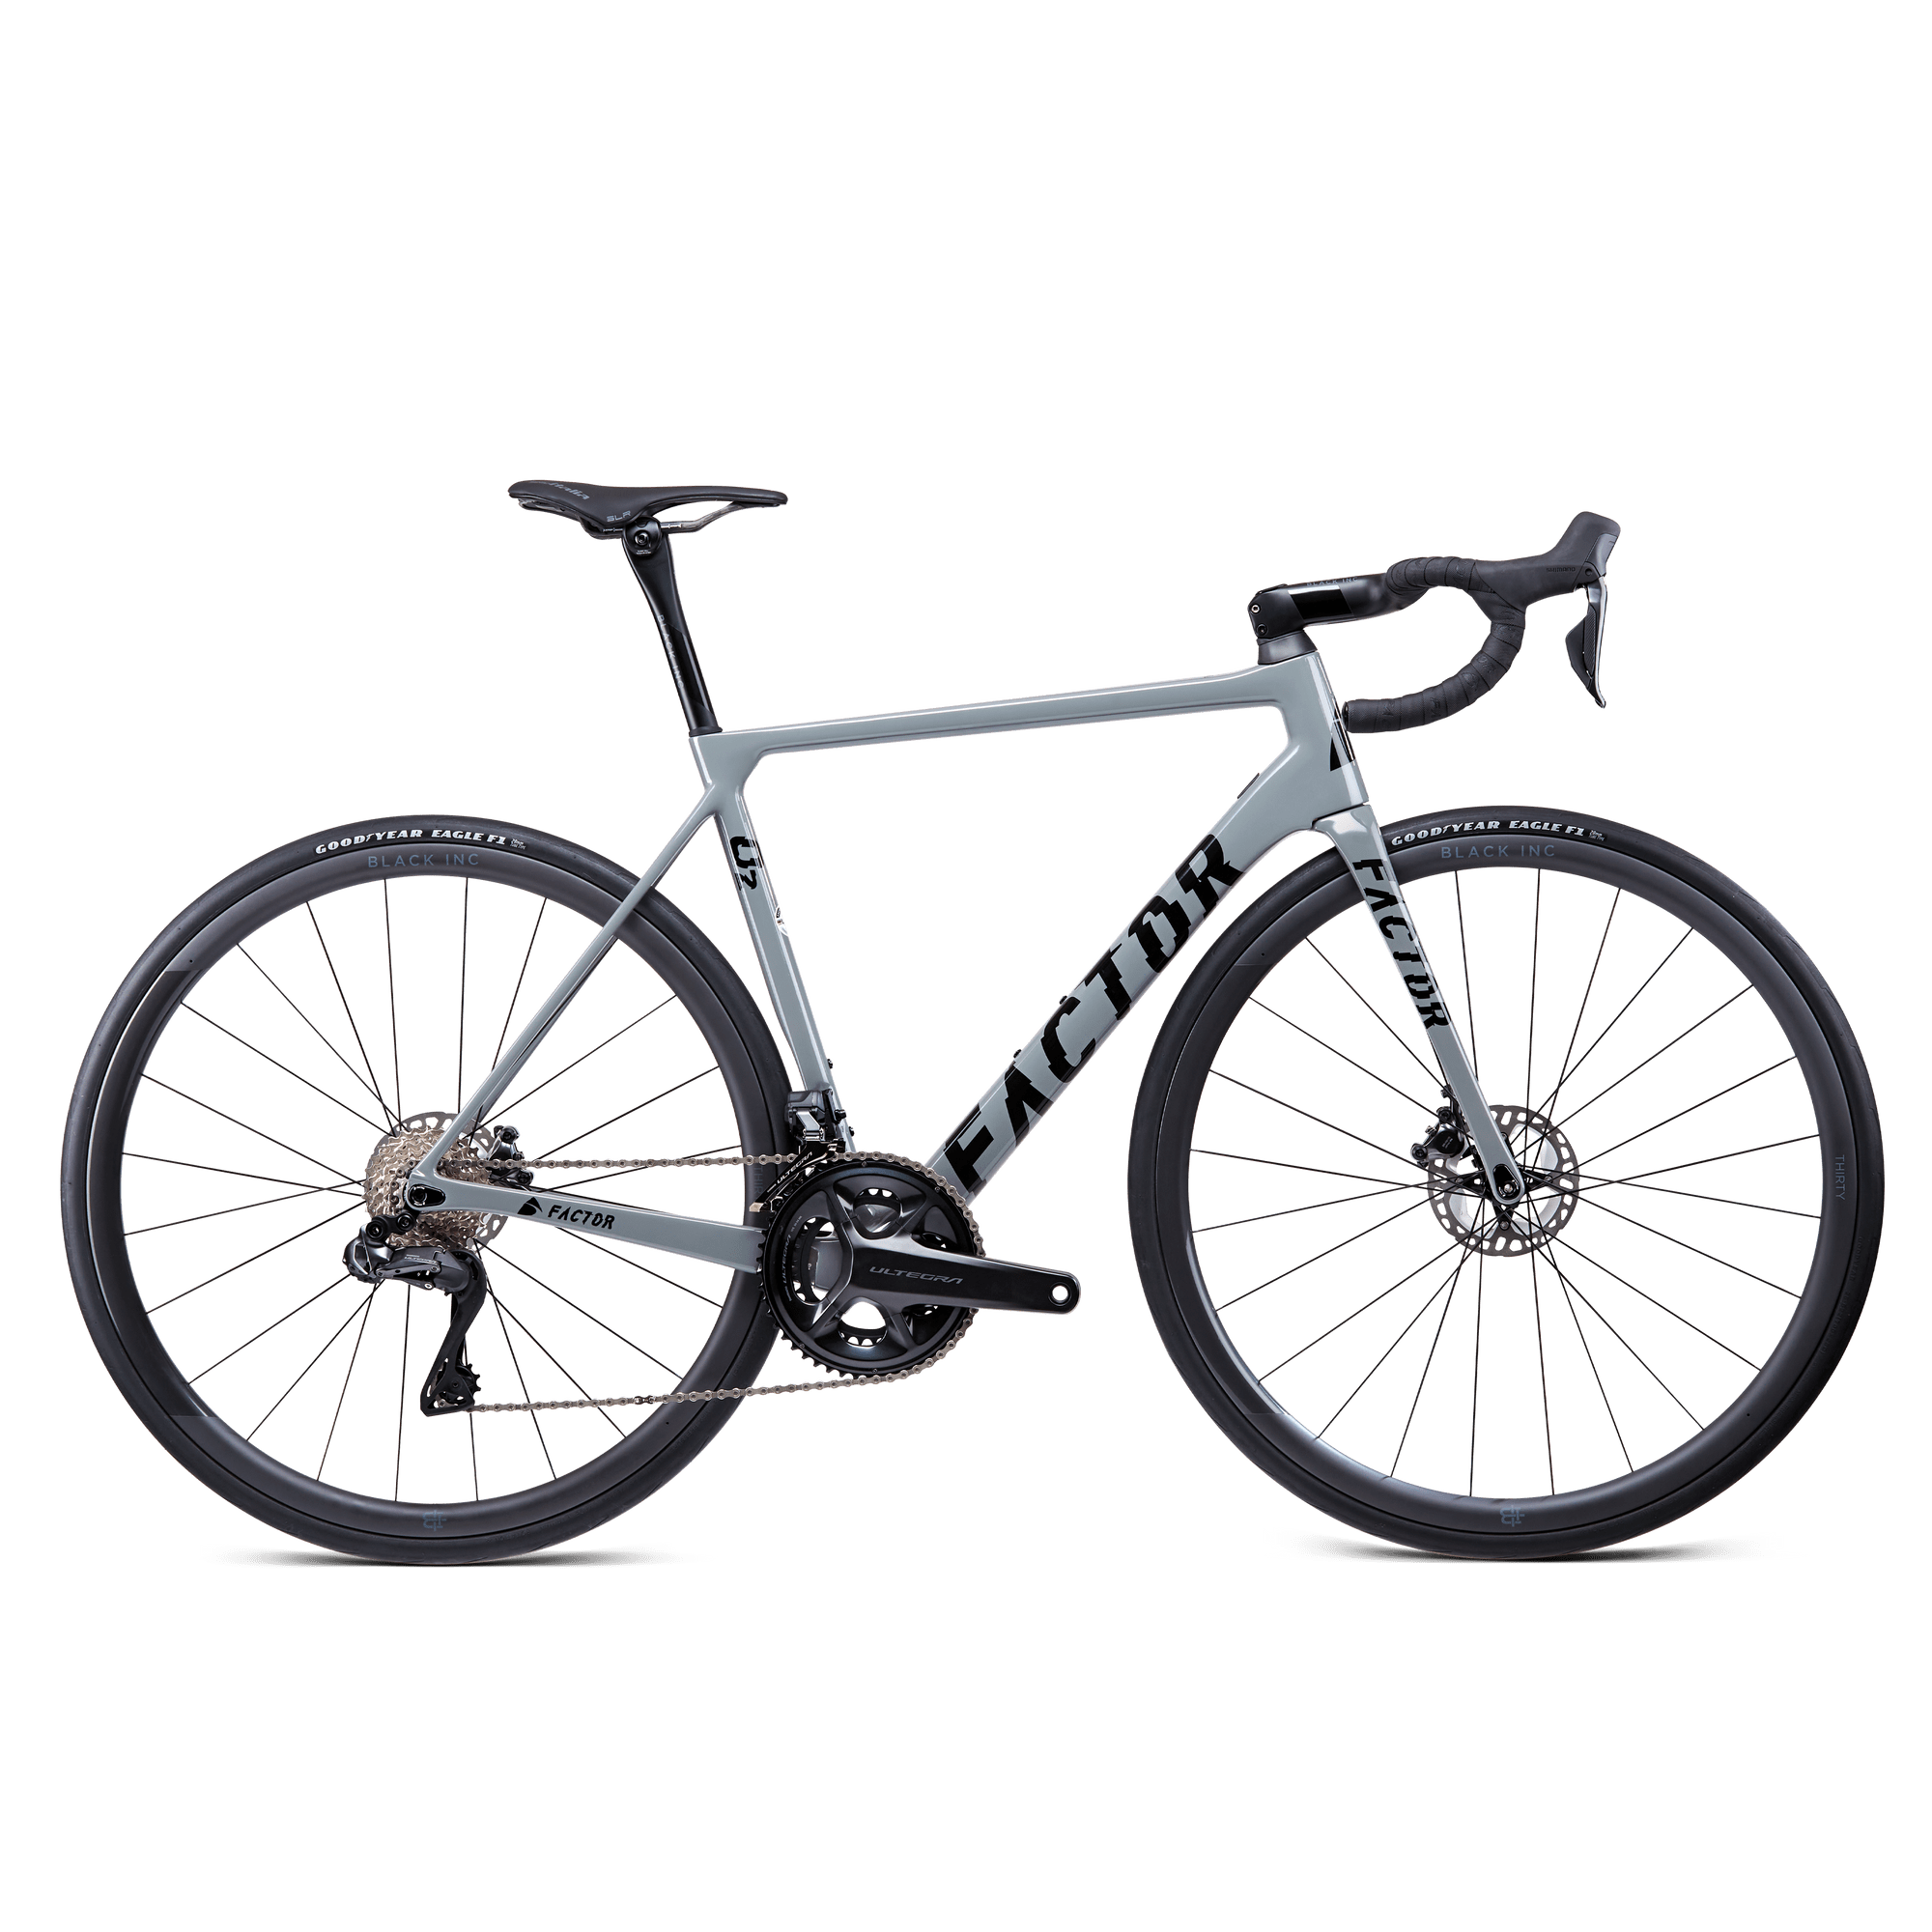 Factor O2 RED AXS Shatter Gray / 49cm Bikes - Road